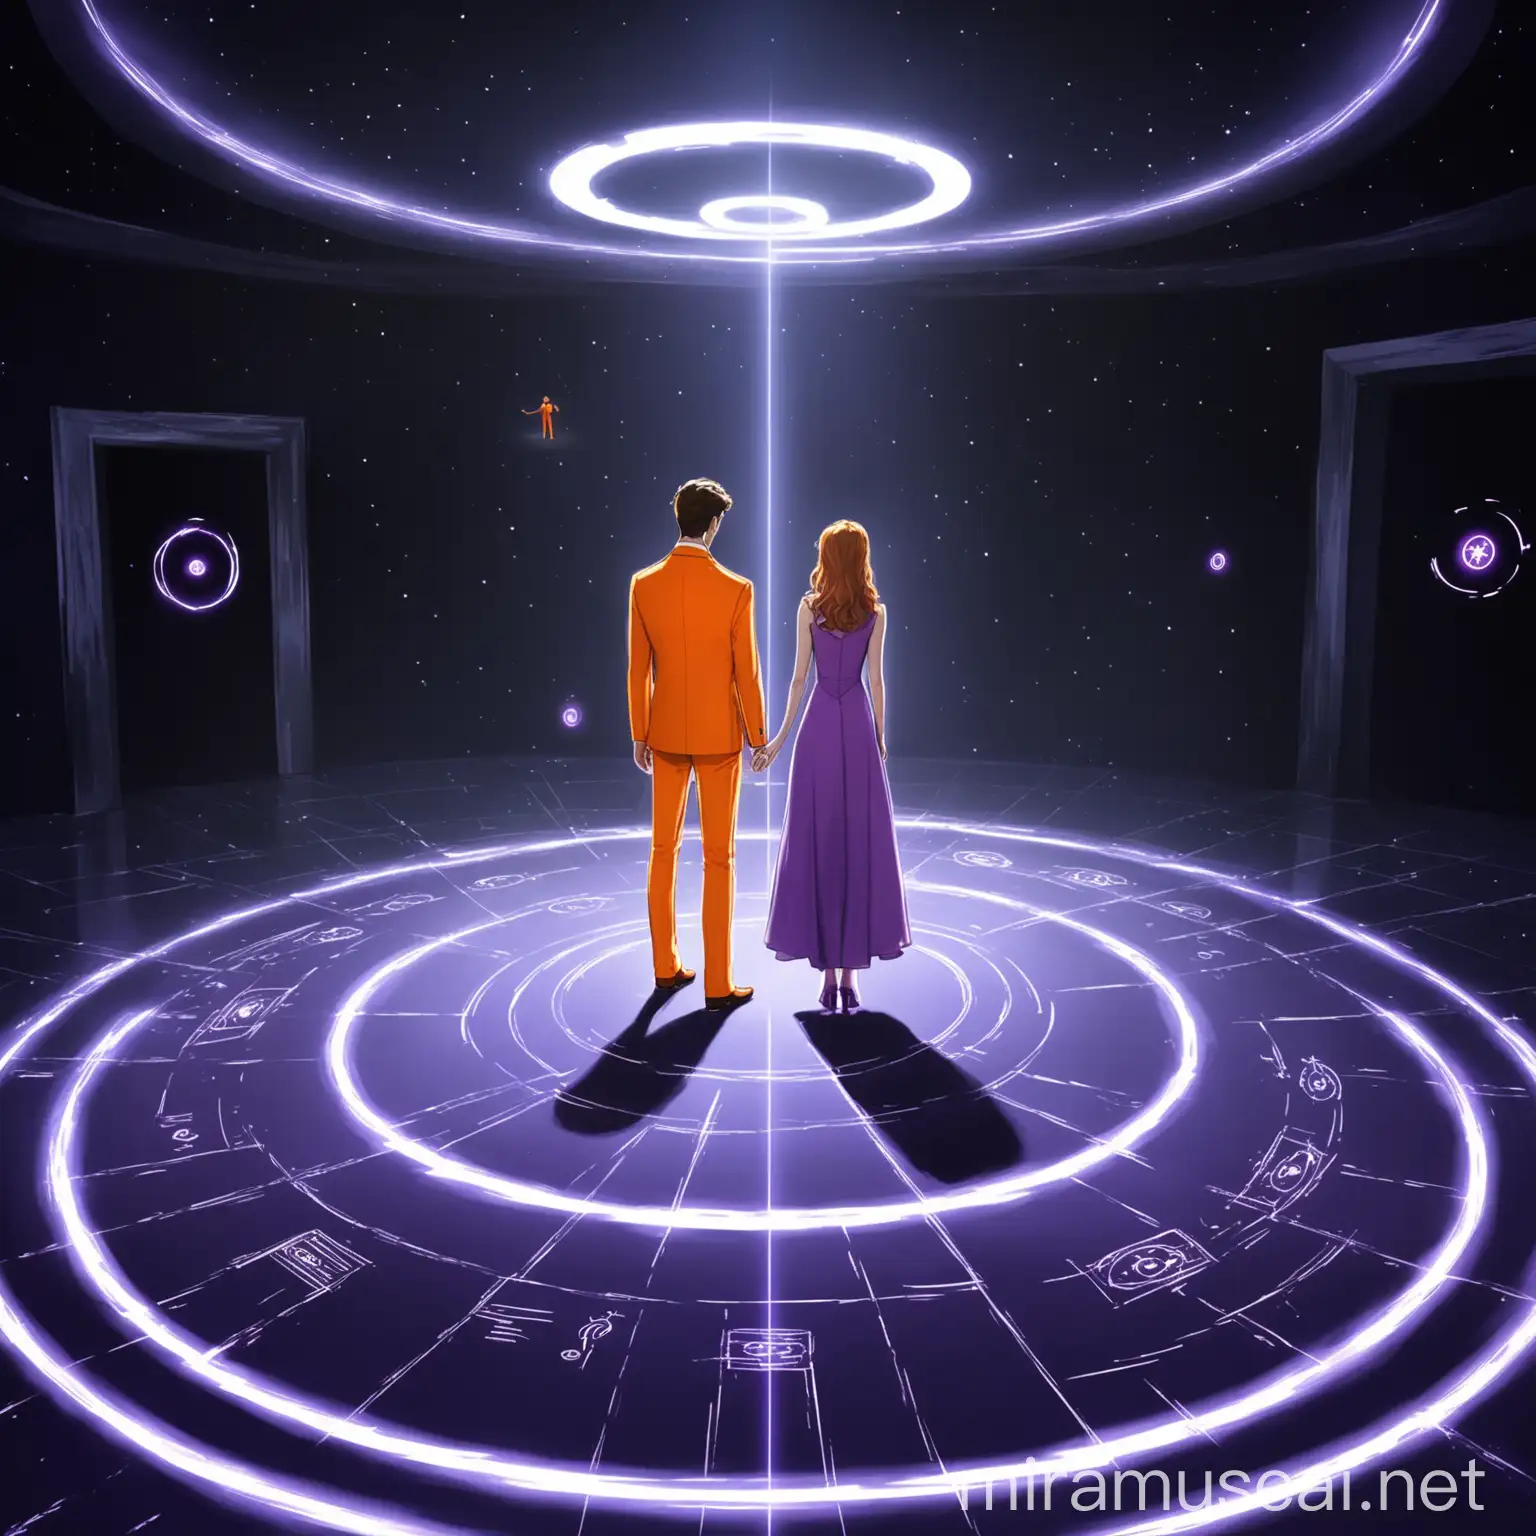 There is a handsome man in his 20s in an orange suit and a beautiful woman in his 20s in a purple dress.nThey stand where a circle is drawn on the floor. White light is emitted from the ceiling.nThe atmosphere in the background is a place to teleport.n